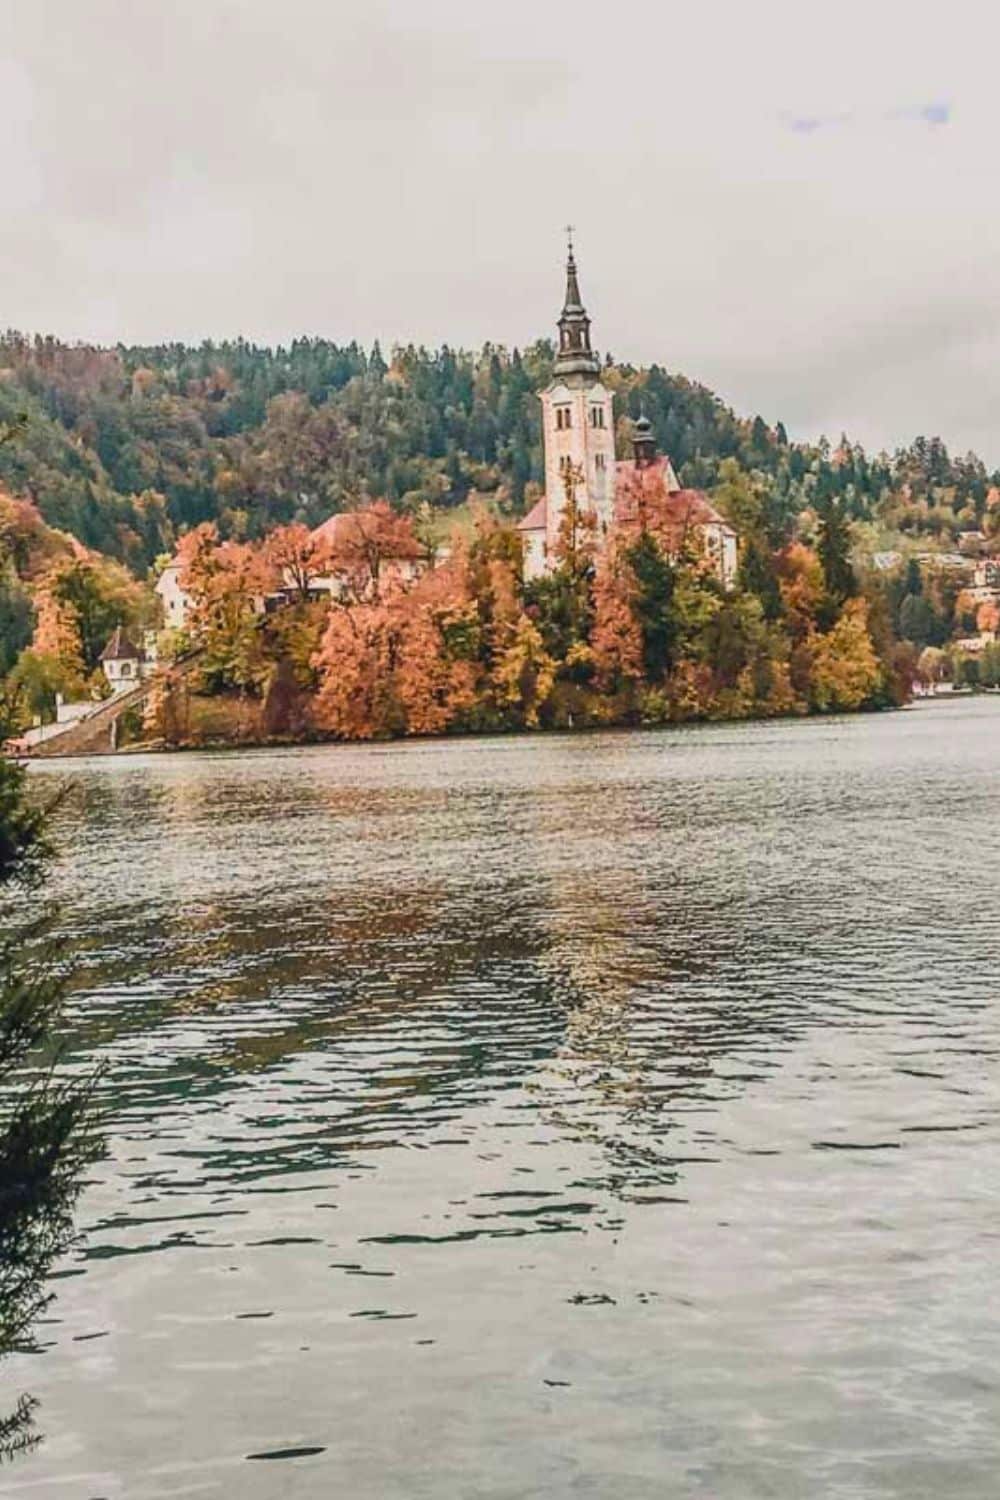 The picturesque Pilgrimage Church of the Assumption of Maria on Bled Island, surrounded by the autumnal hues of Lake Bled's trees, inviting visitors for a tranquil winter exploration.